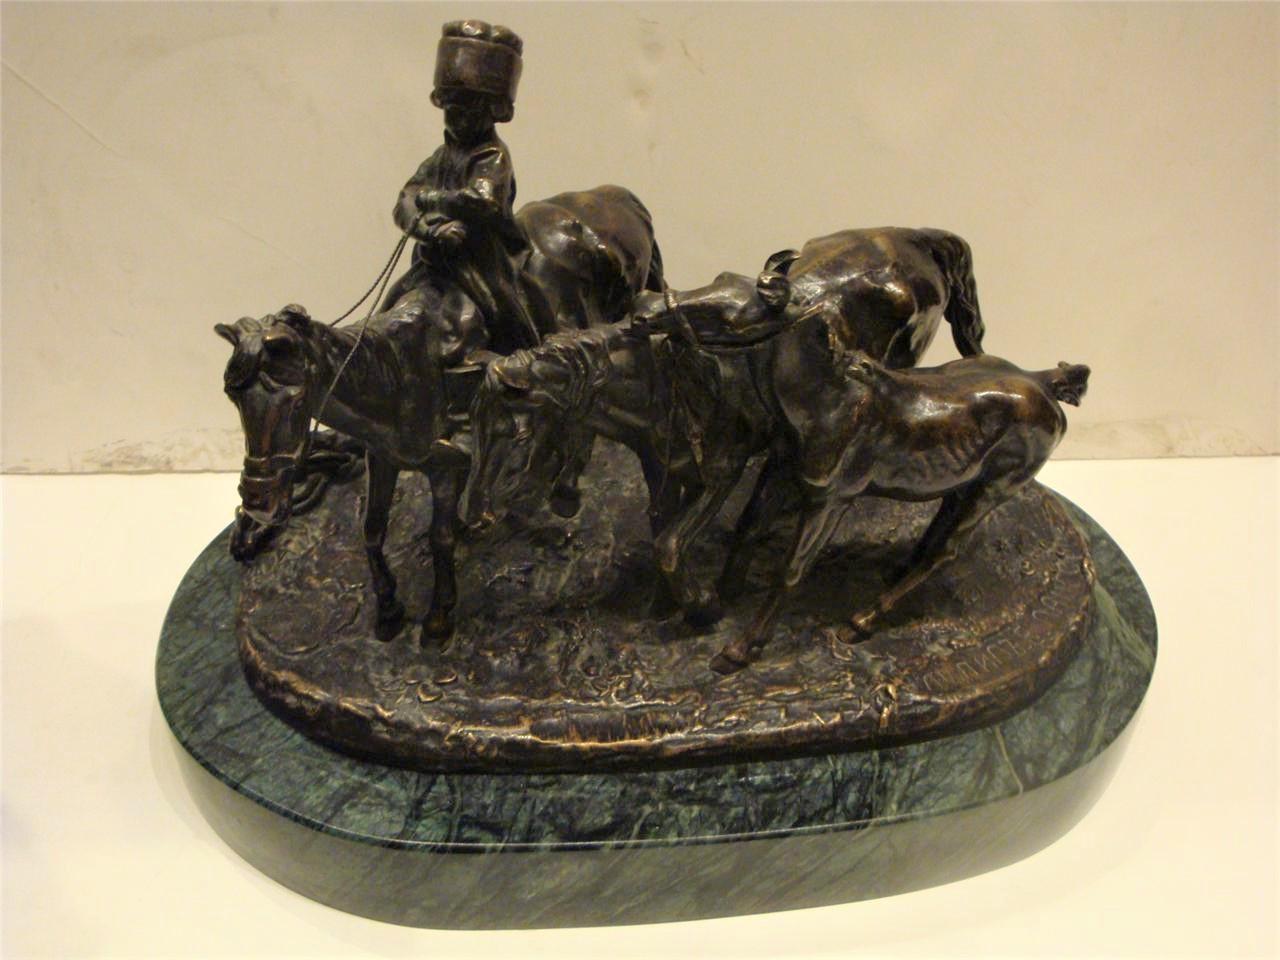 A Beautiful and Rare Original 19th Century Russian Bronze Sculpture by Evgeni Lanceray, Cast bronze figural group. Bronze Showcases a young boy on horseback, with two additional horses, signed, with other markings. Beautifully standing on a Green